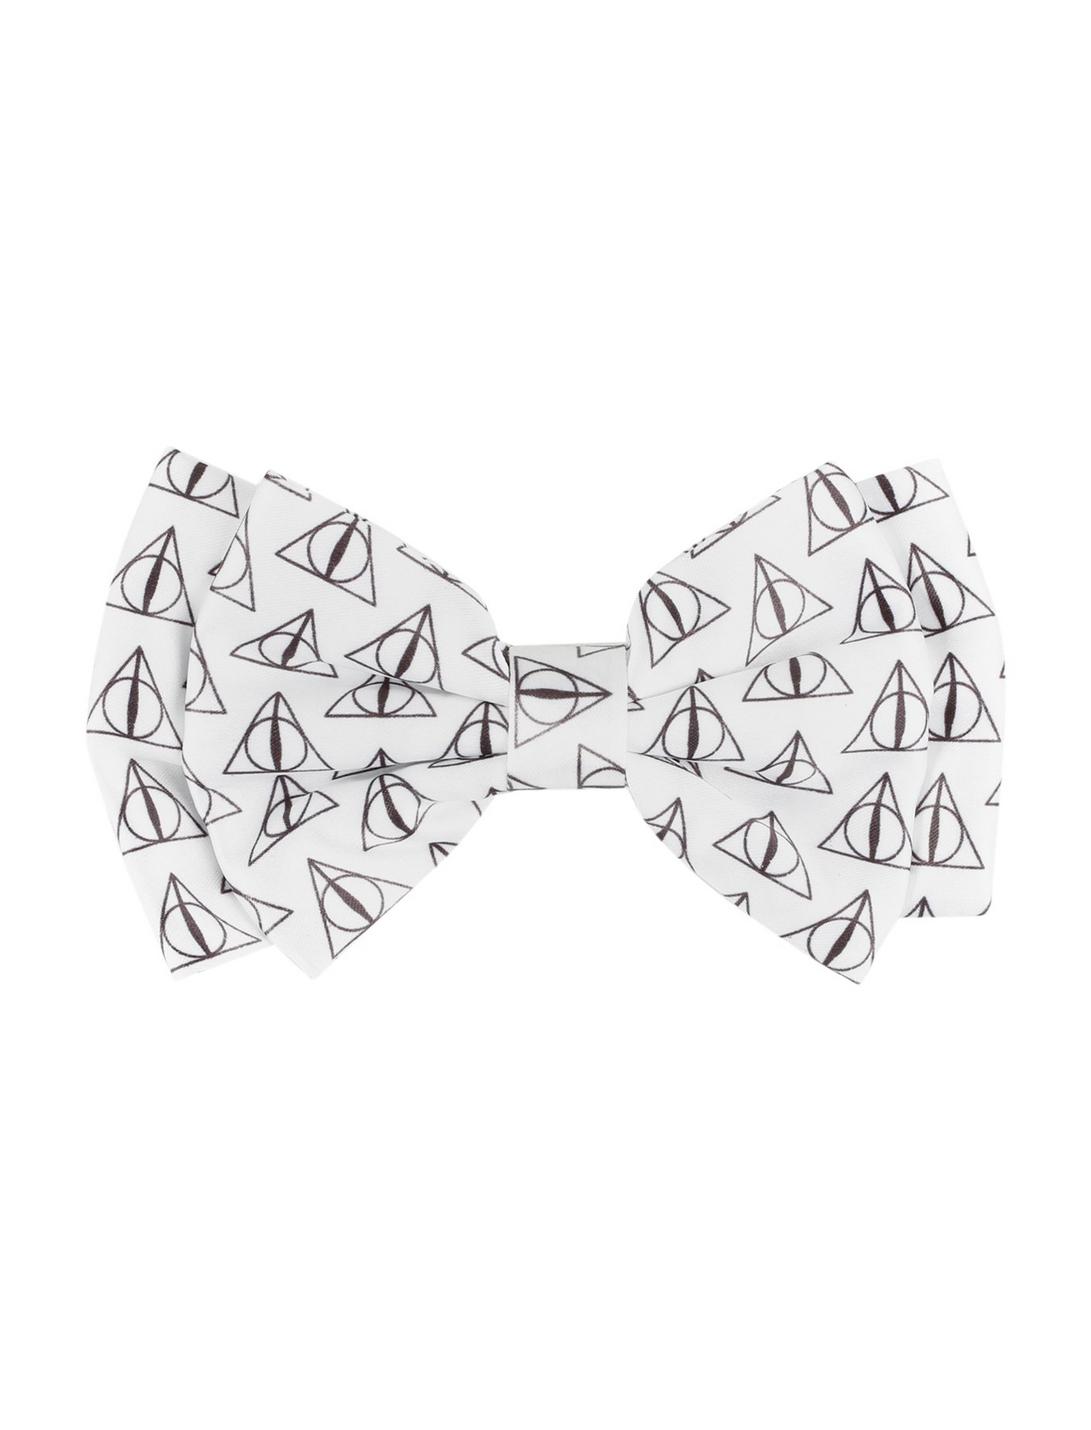 Harry Potter Deathly Hallows Hair Bow, , hi-res